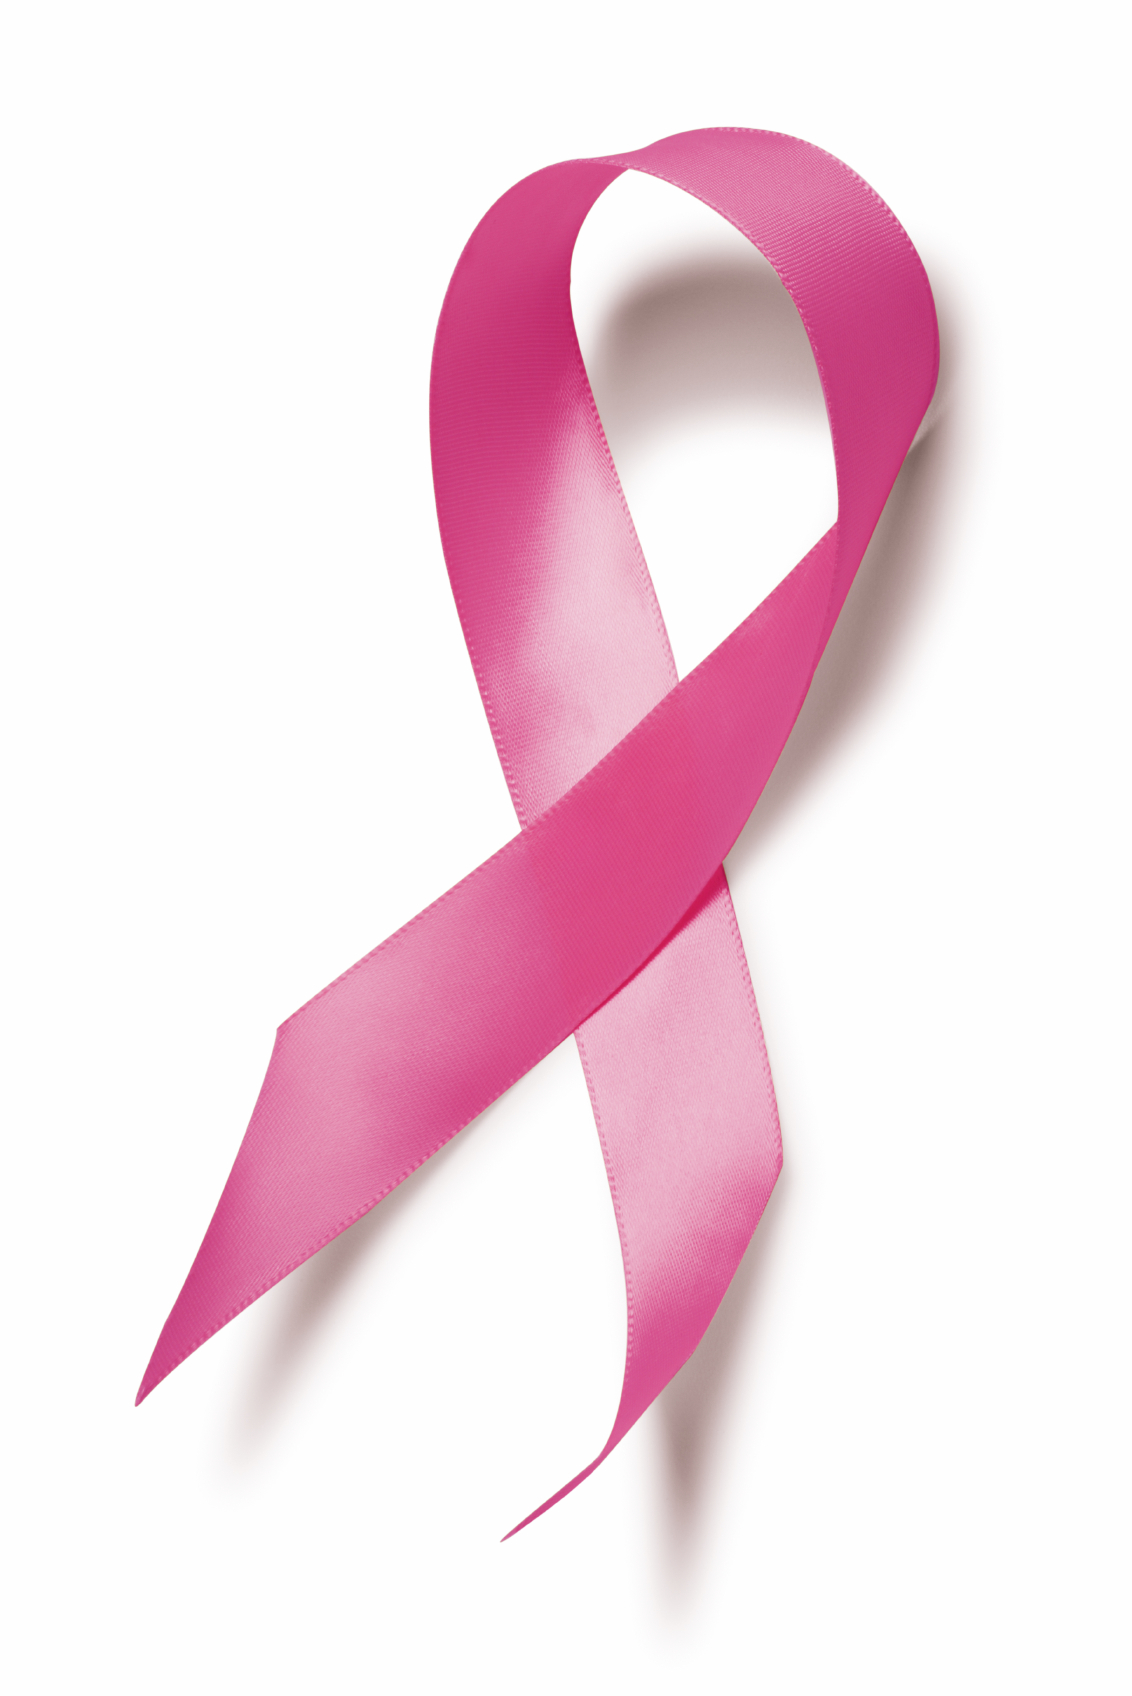 Breast cancer ribbon 2 clip art vector free on